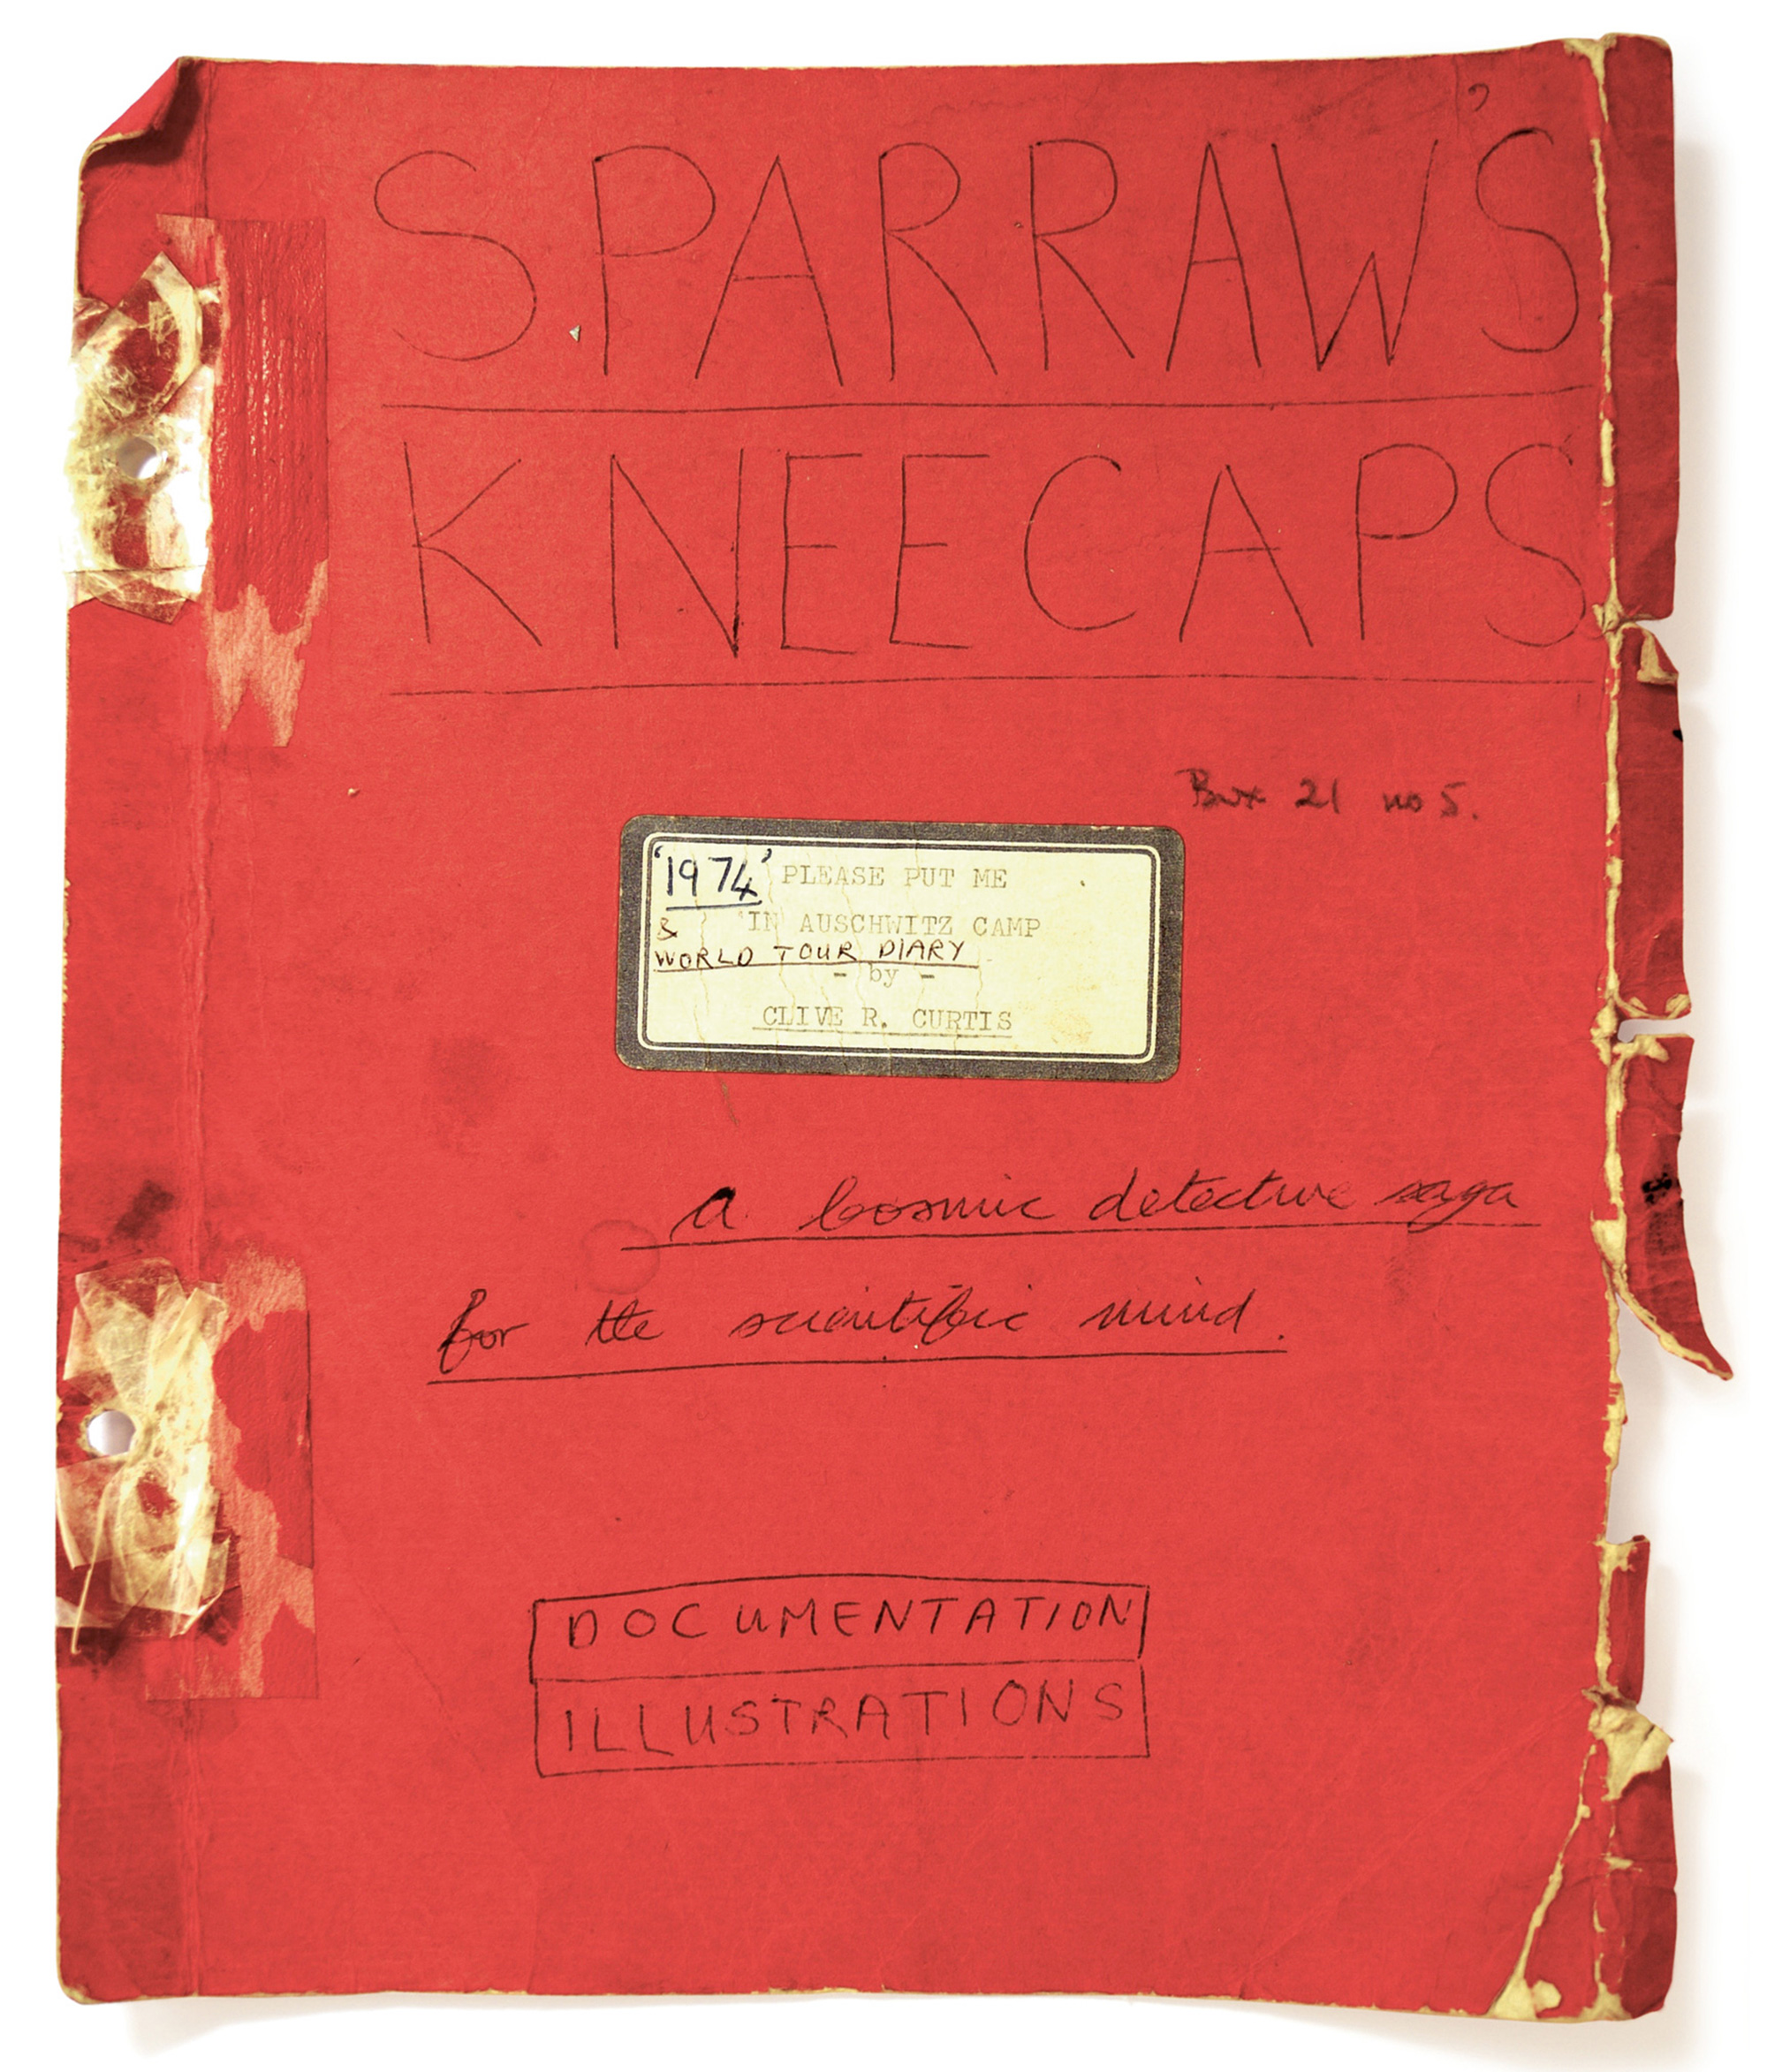 A photograph of the tattered front cover of the “Sparraw’s Kneecaps” manuscript by Clive R. Curtis, from circa nineteen seventy-four.